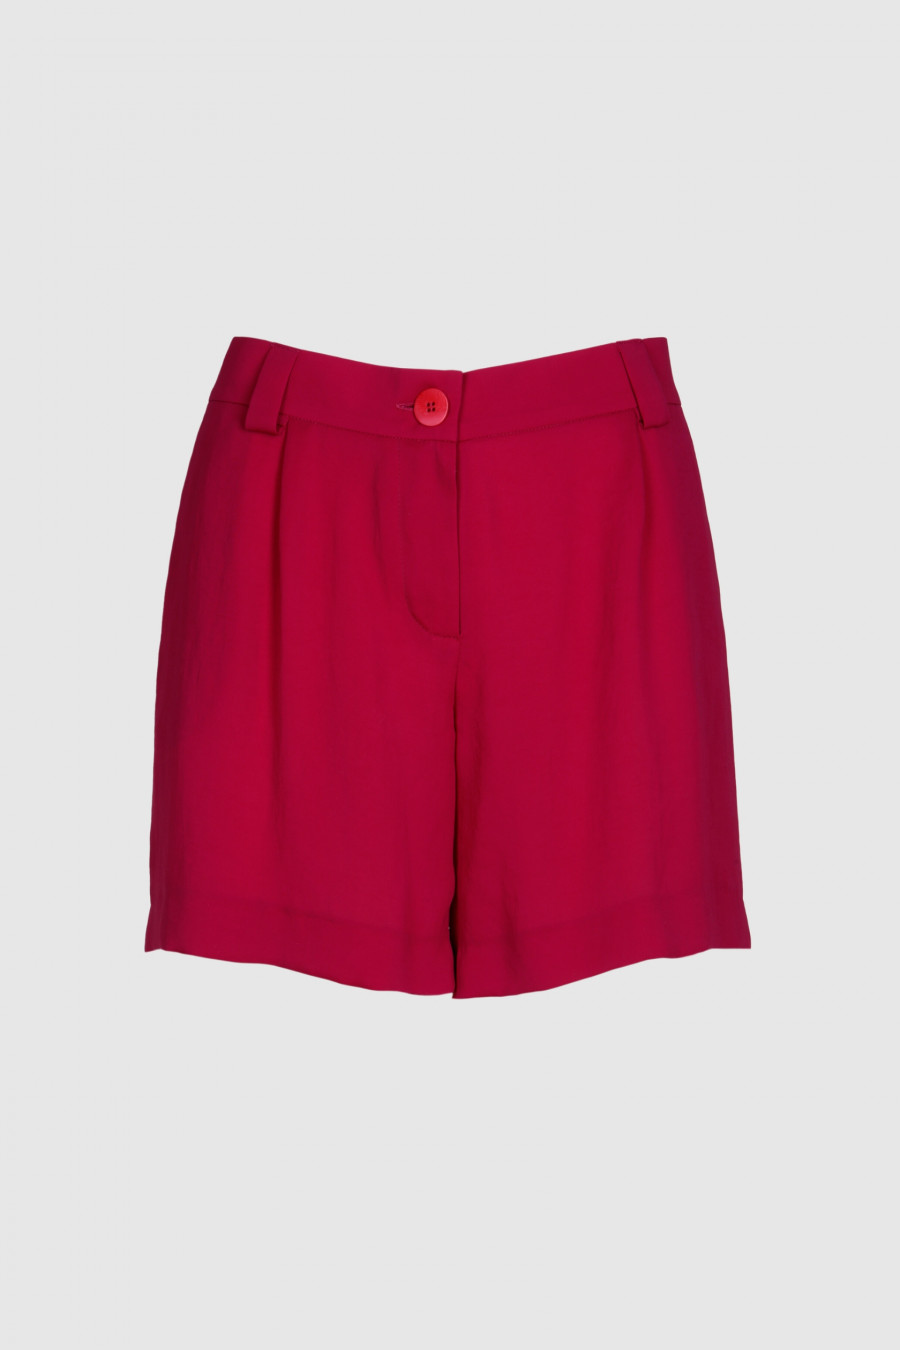 Microfibre shorty in Cerise Pink